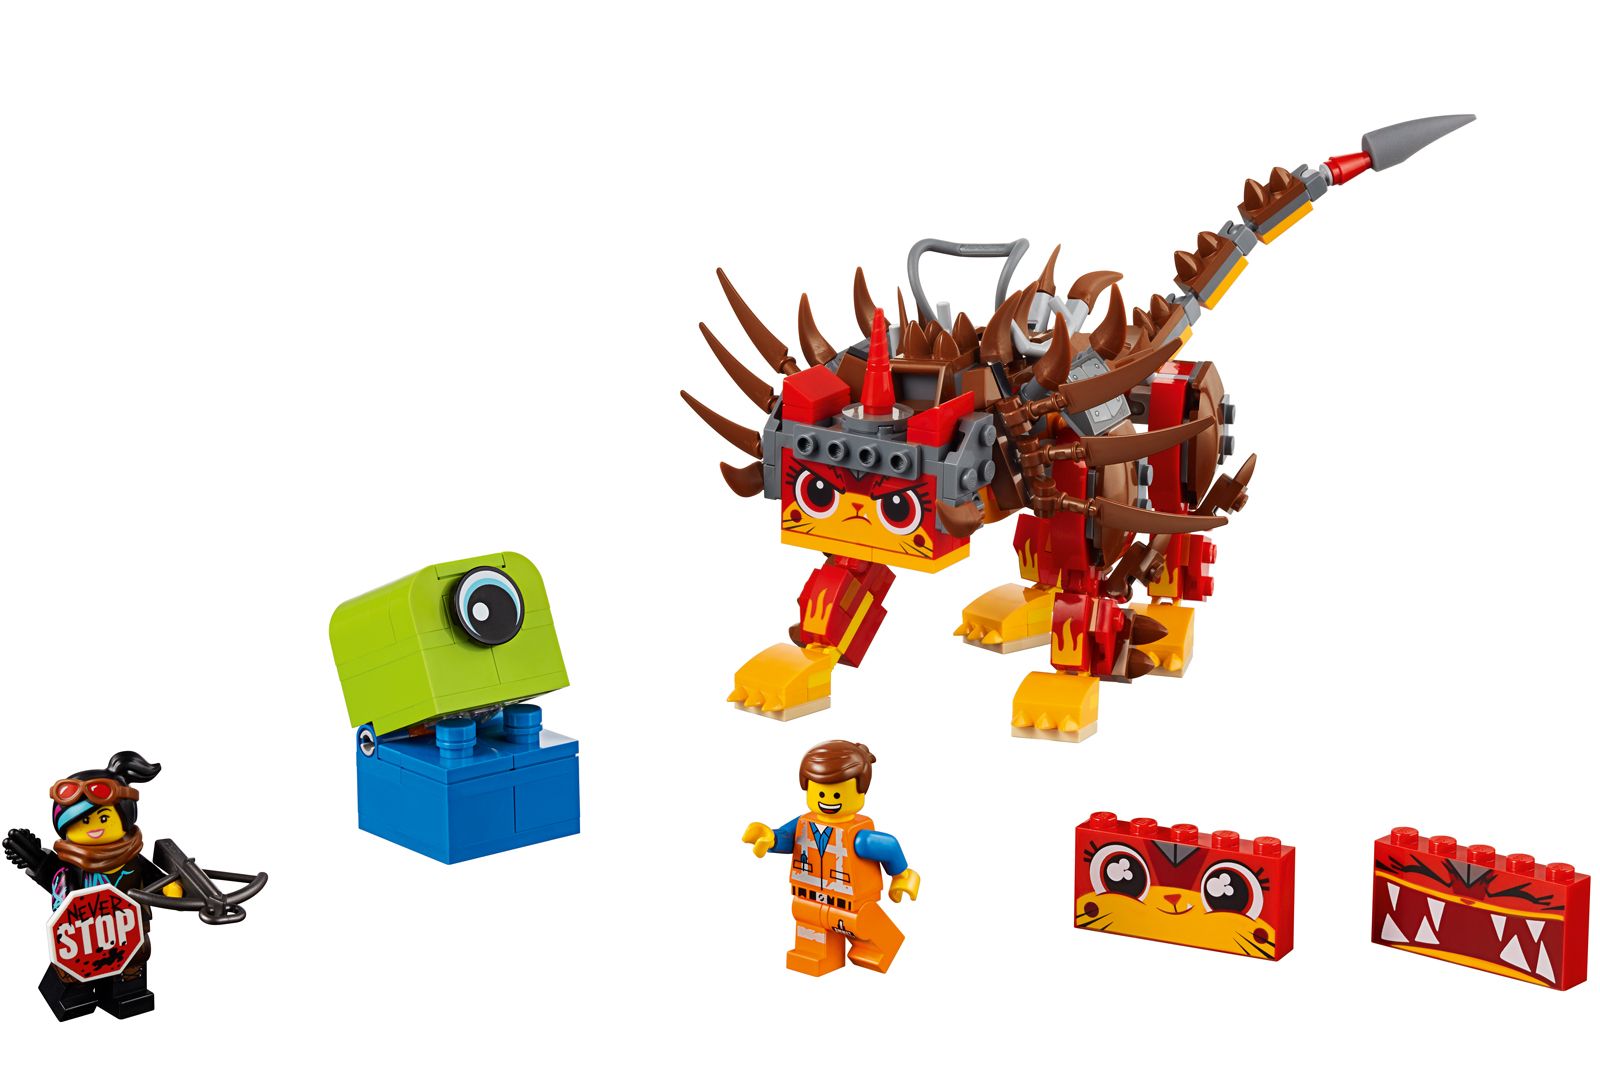 21 Lego sets from The Lego Movie 2 The Second Part - every set covered image 19